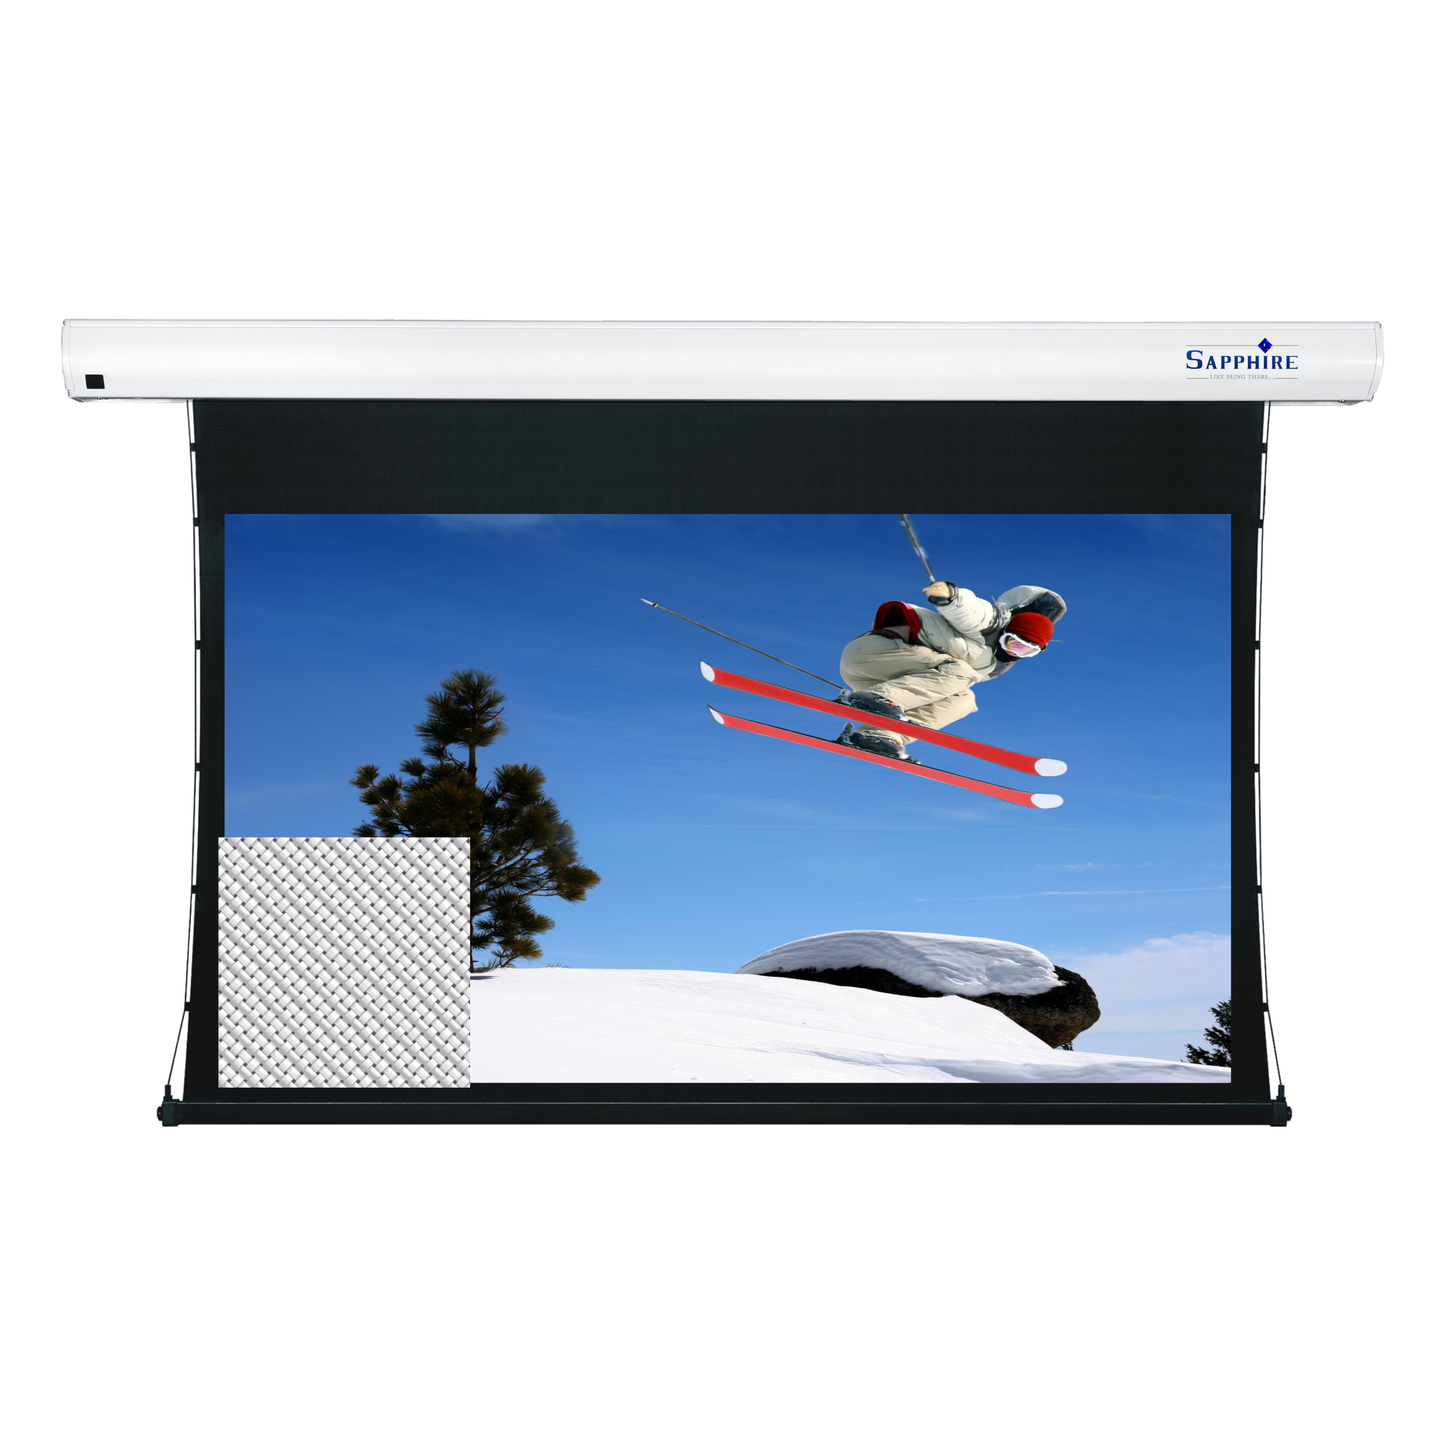 Sapphire Tab Tension Electric Screen Infra Red 16:9 Format Viewing Area 2037mm x 1145mm Woven Approx Case Dimensions L 2490mm x H 145mm x D 137mm